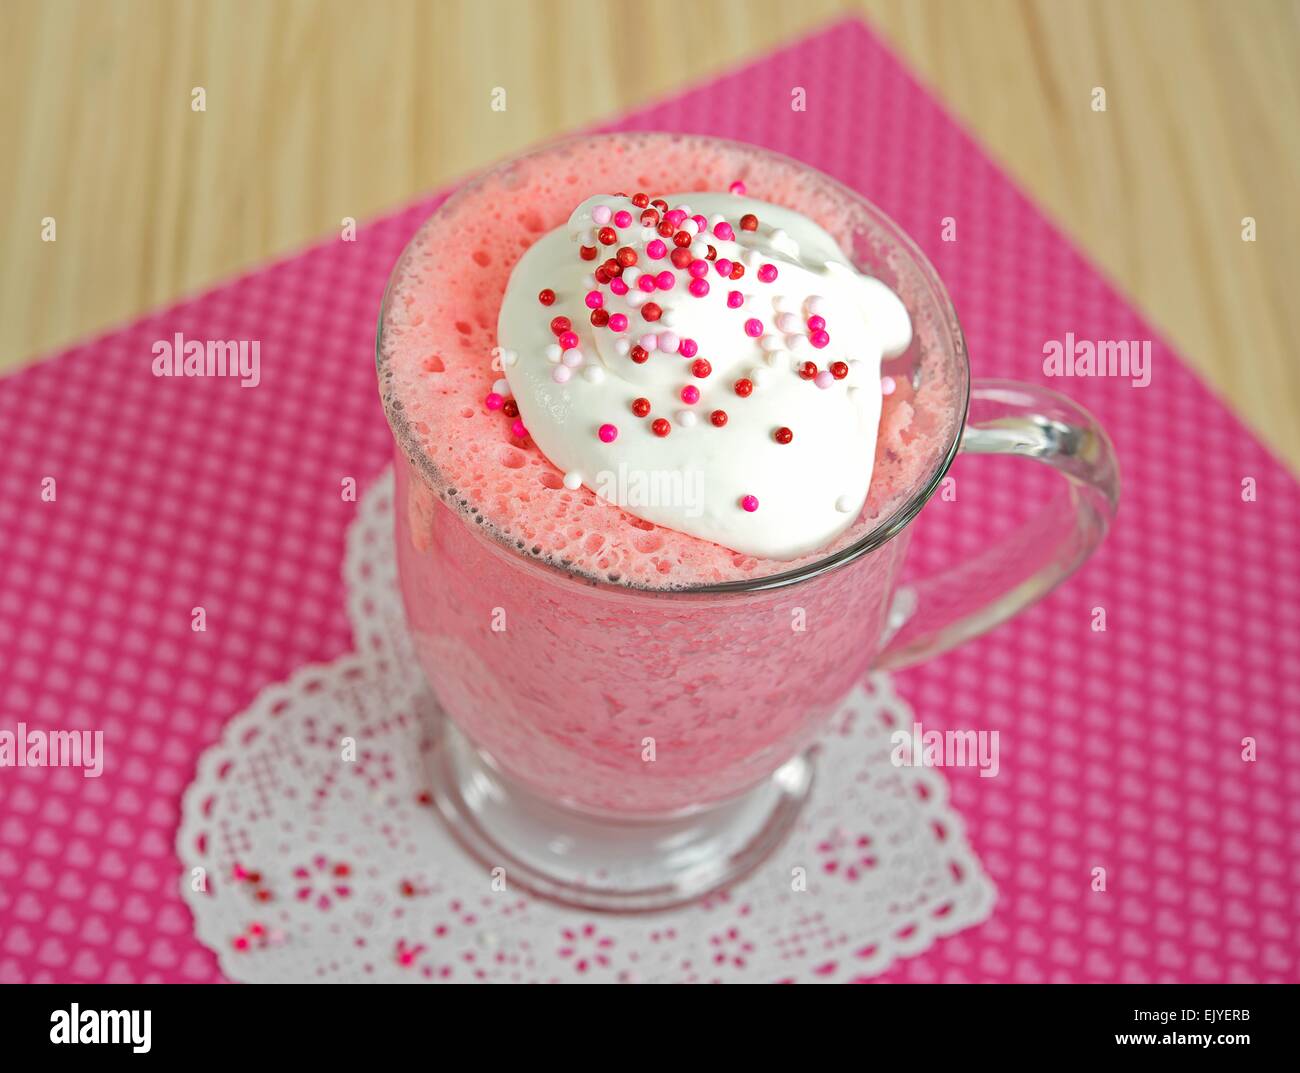 Pink cake in glass mug garnished with whipped cream and sprinkles on lace heart doily. Stock Photo